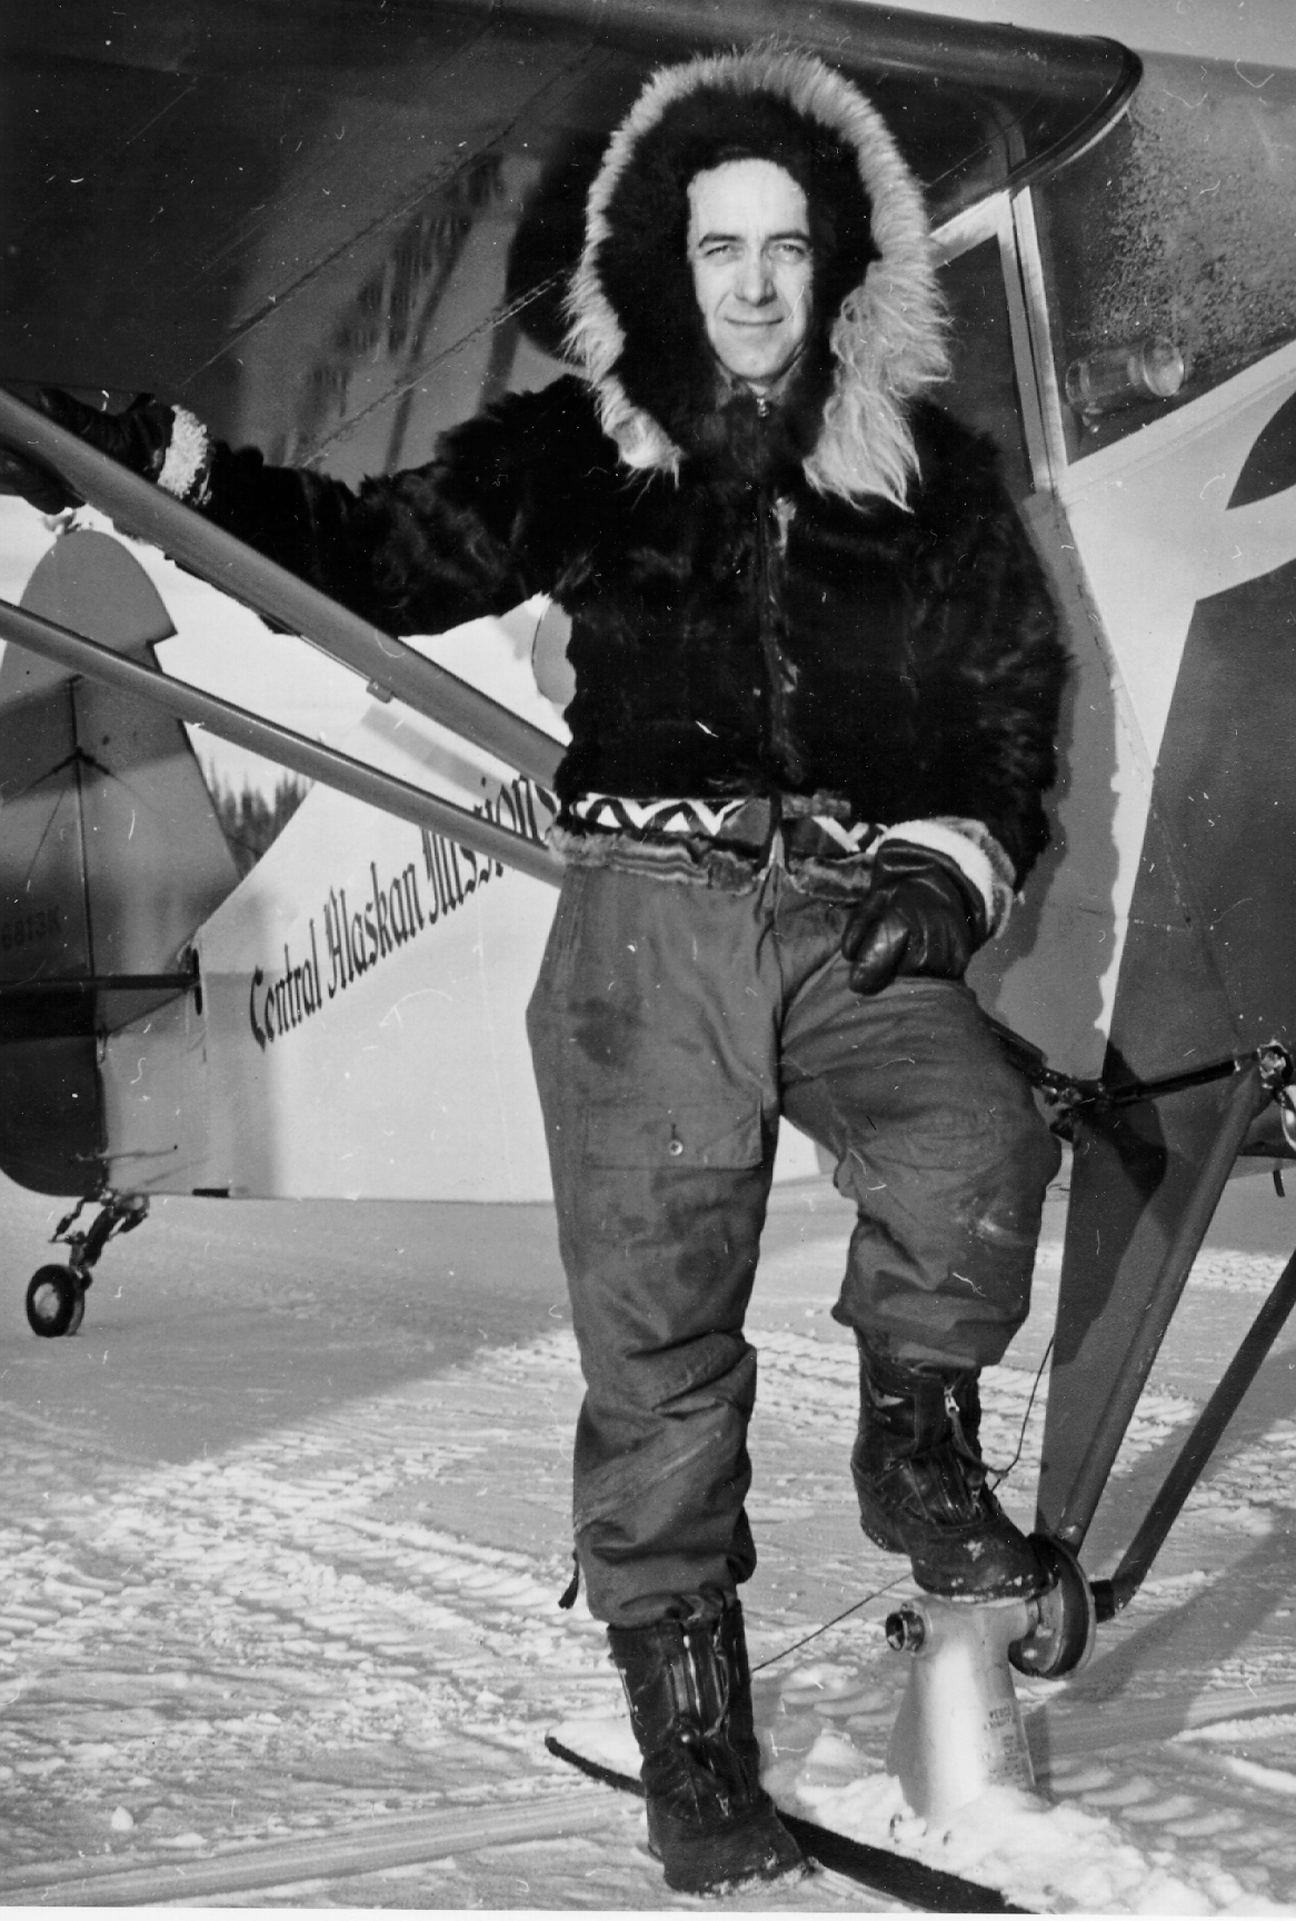 Black and white photo of man and a plane